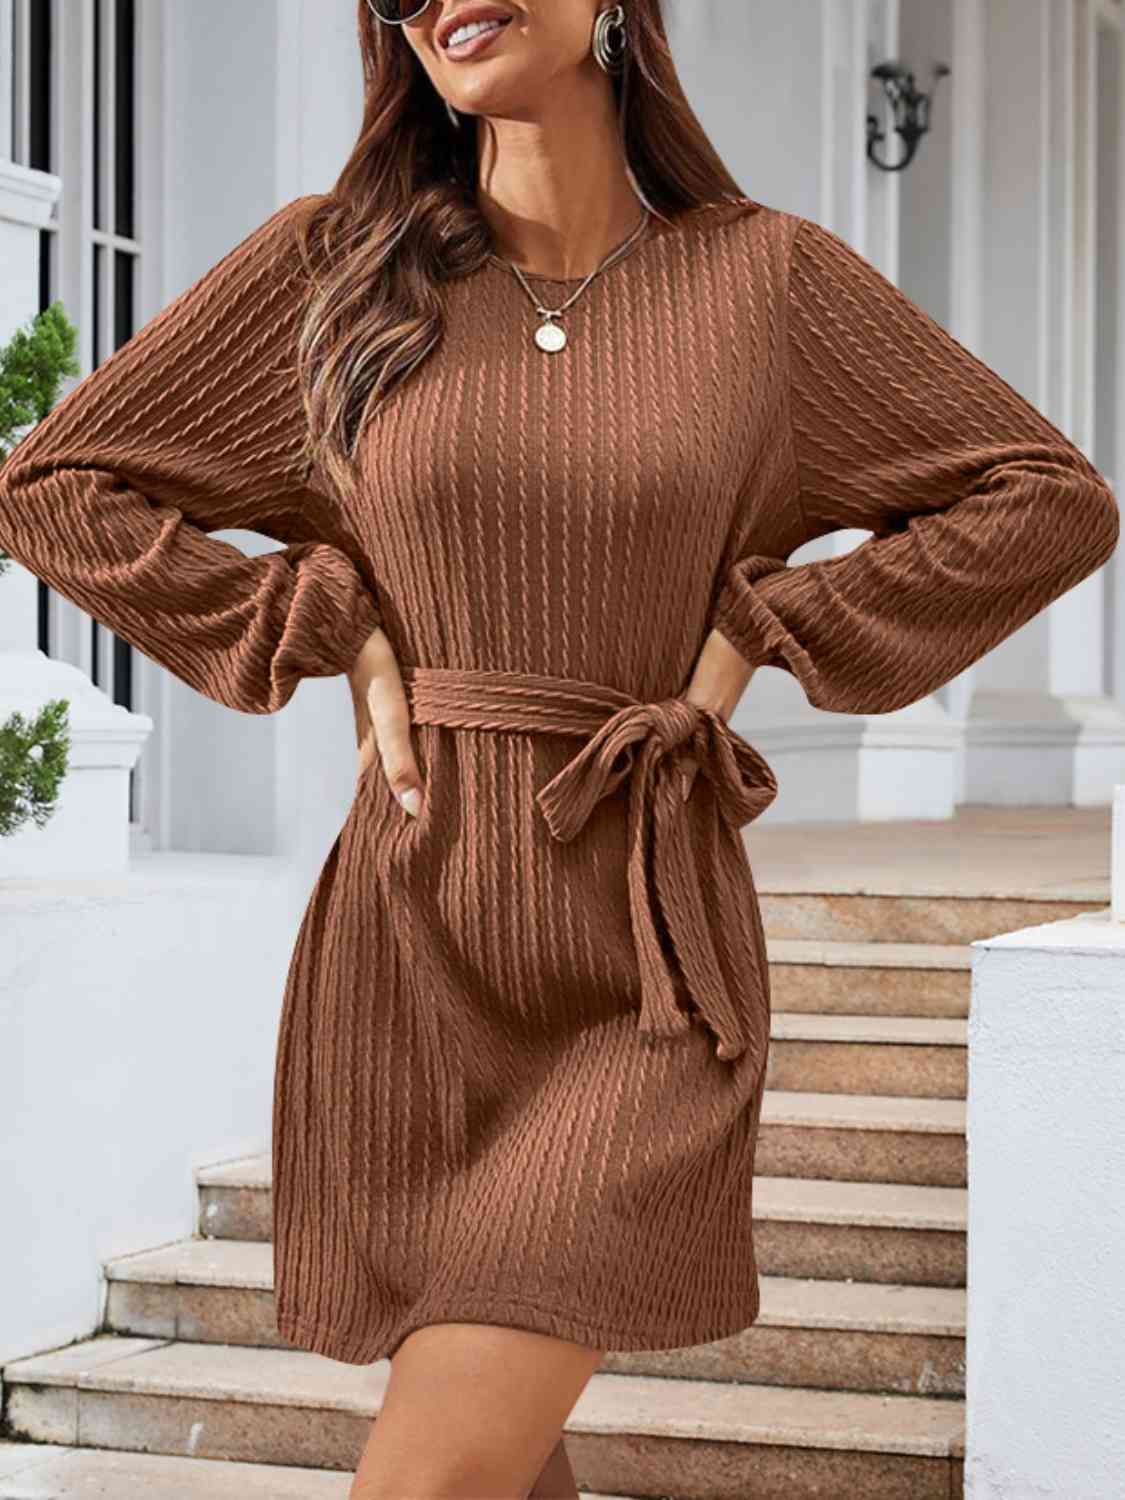 Round Neck Tie Front Long Sleeve Dress - Tan / S - All Dresses - Dresses - 1 - 2024